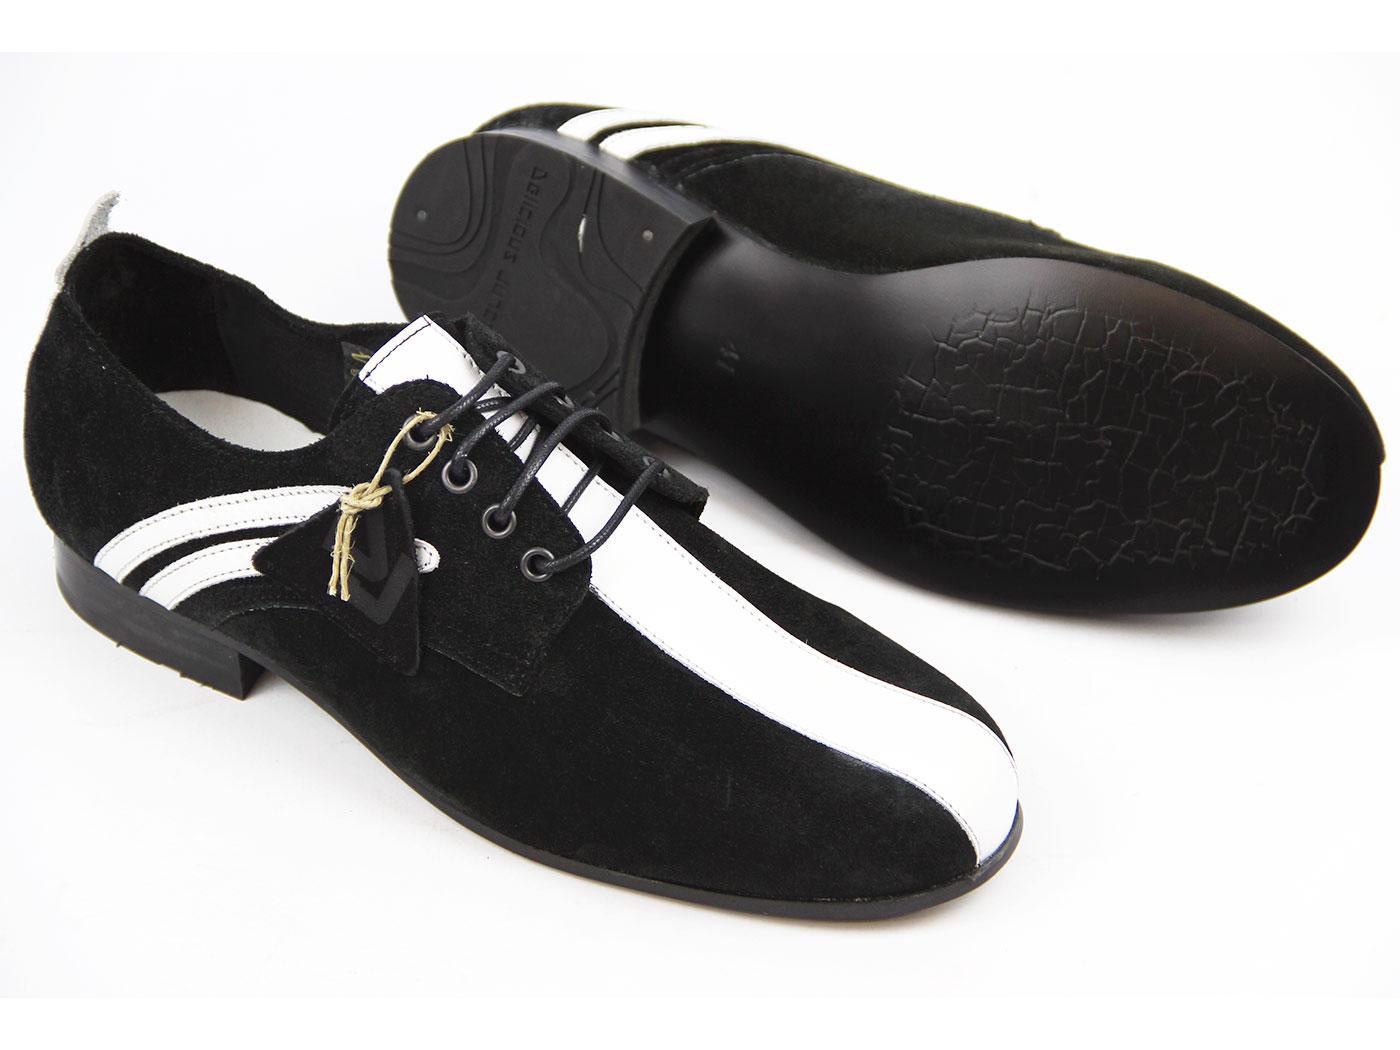 Delicious Junction Retro Mod Suede Badger Shoes in Black/White